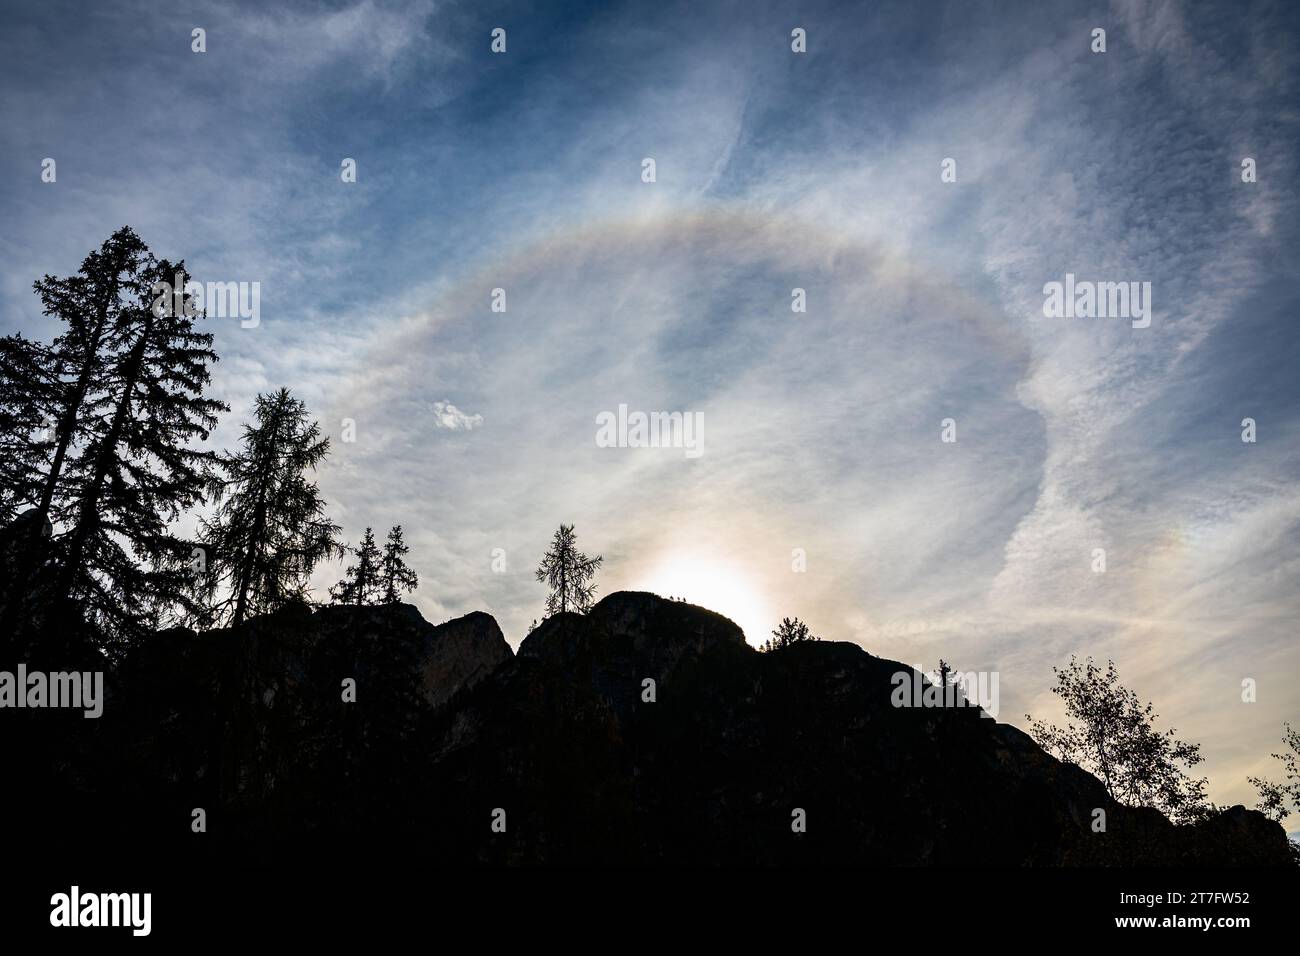 Bright colorful 22 degrees halo over a mountain. Stock Photo